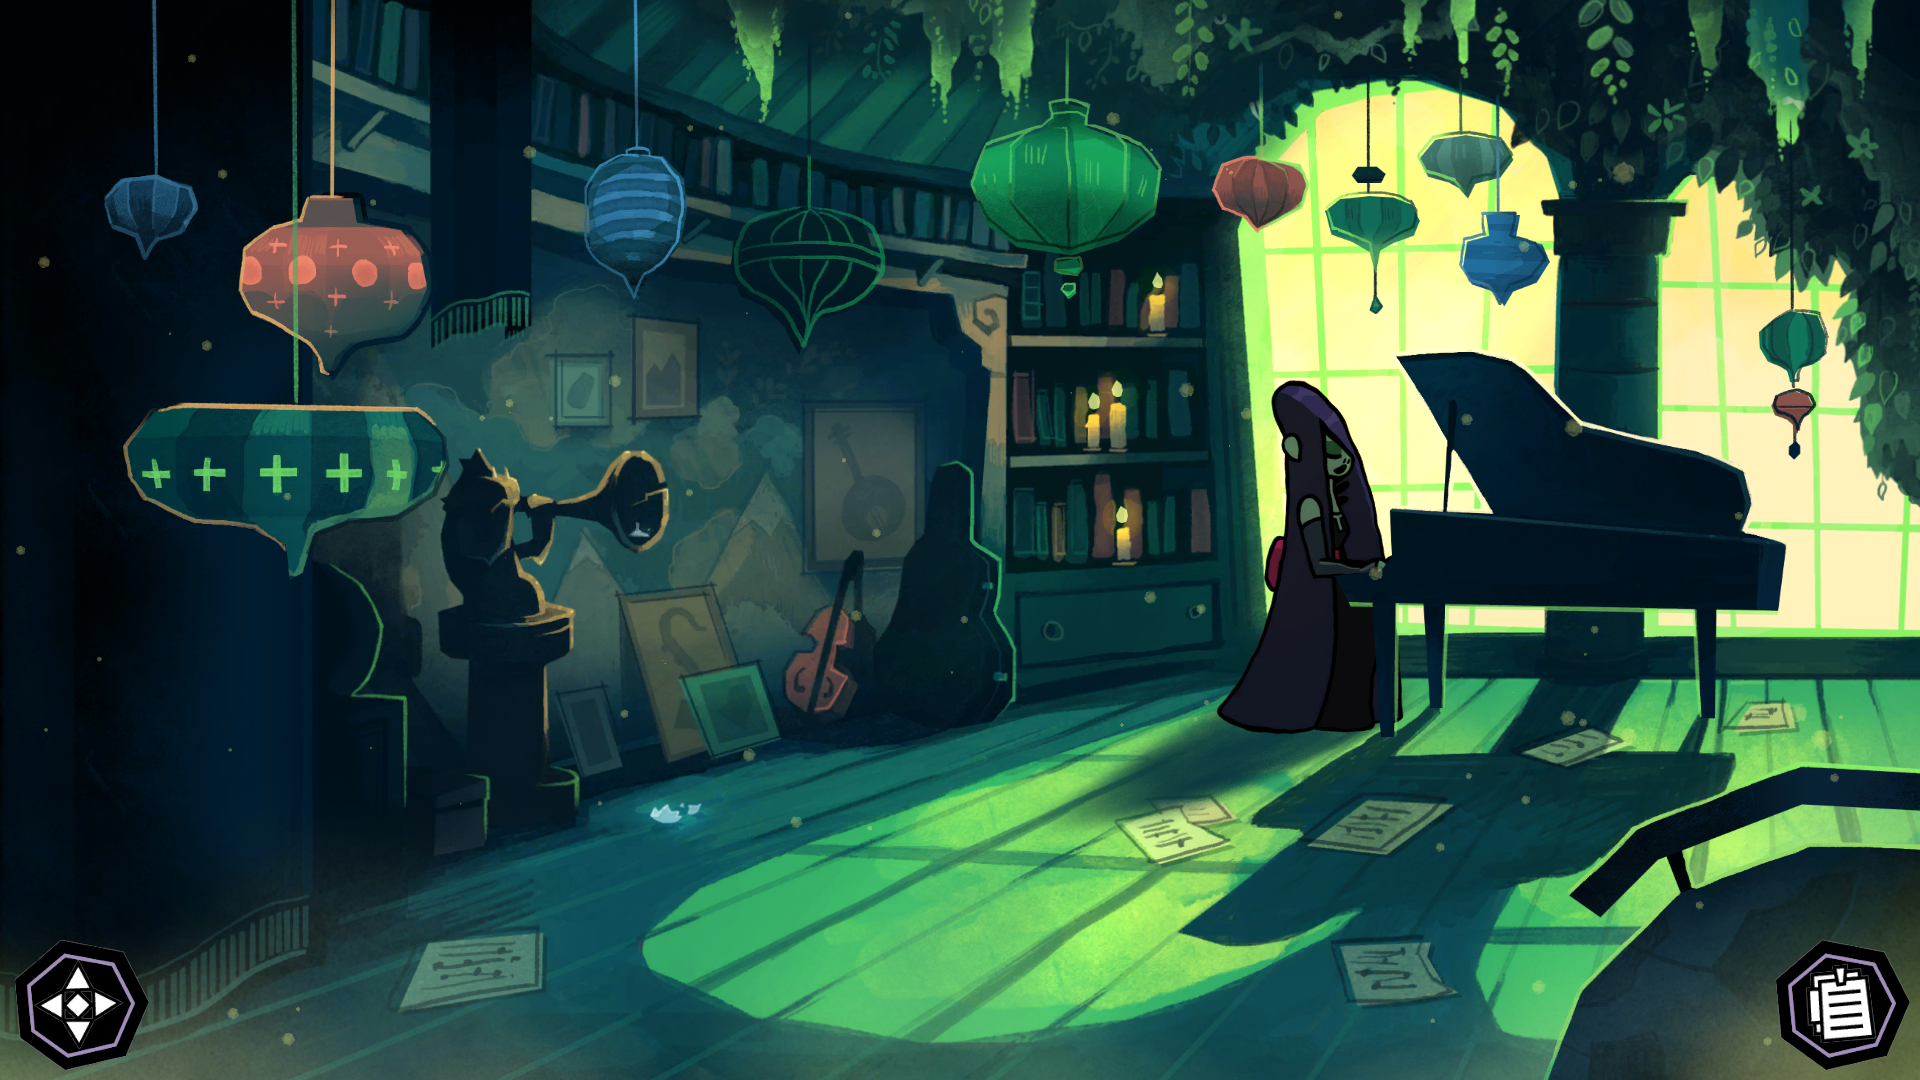 06_Music_Room_1920x1080.png